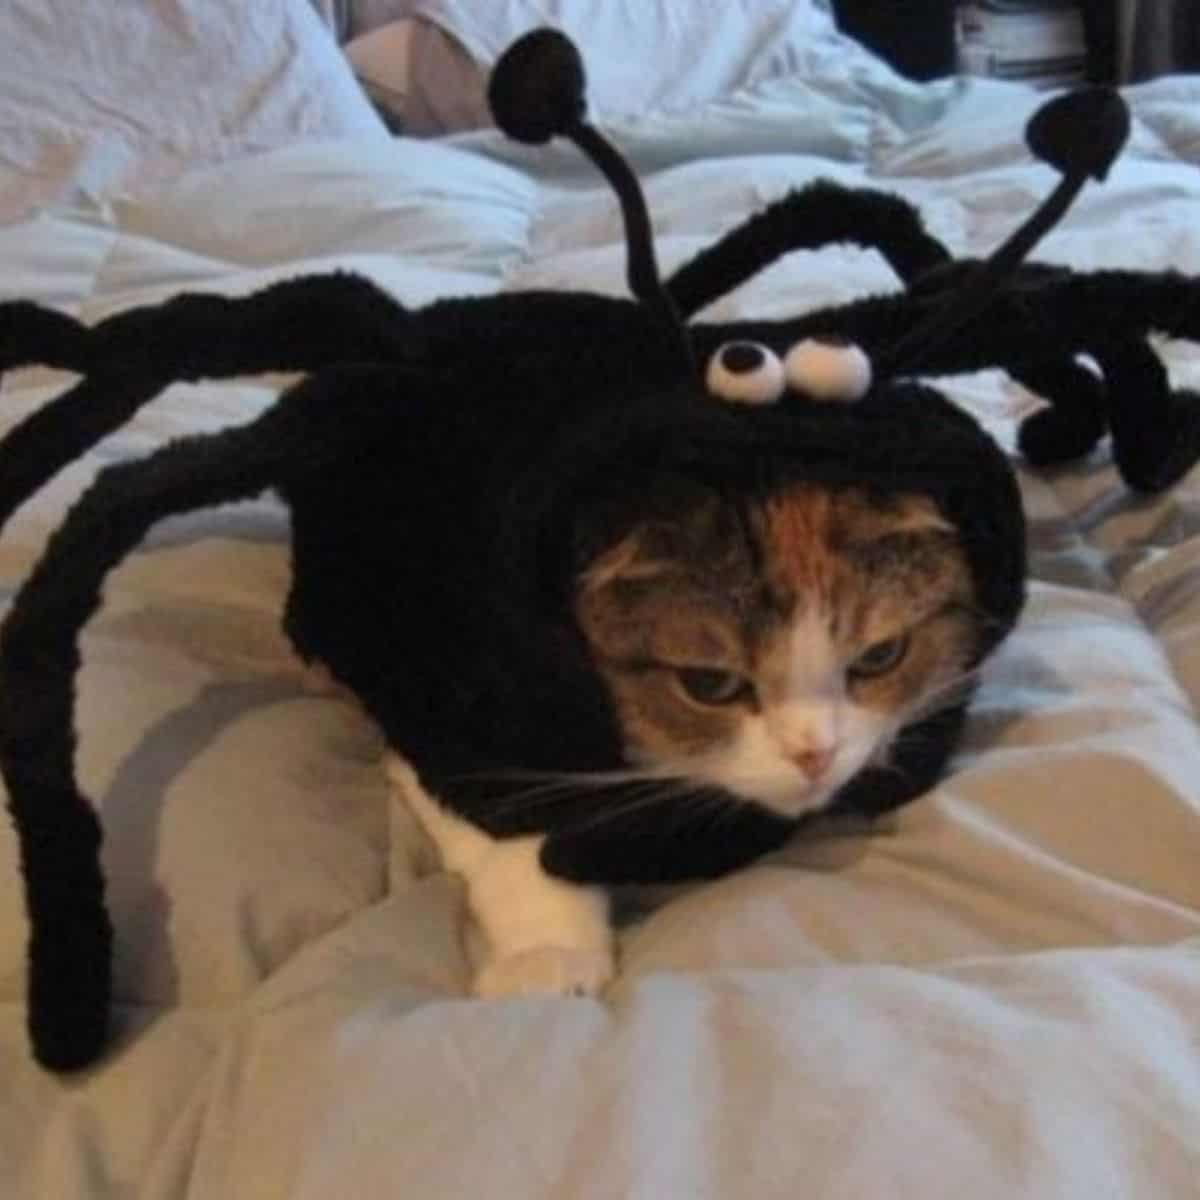 the cat is sitting on the bed disguised as a spider